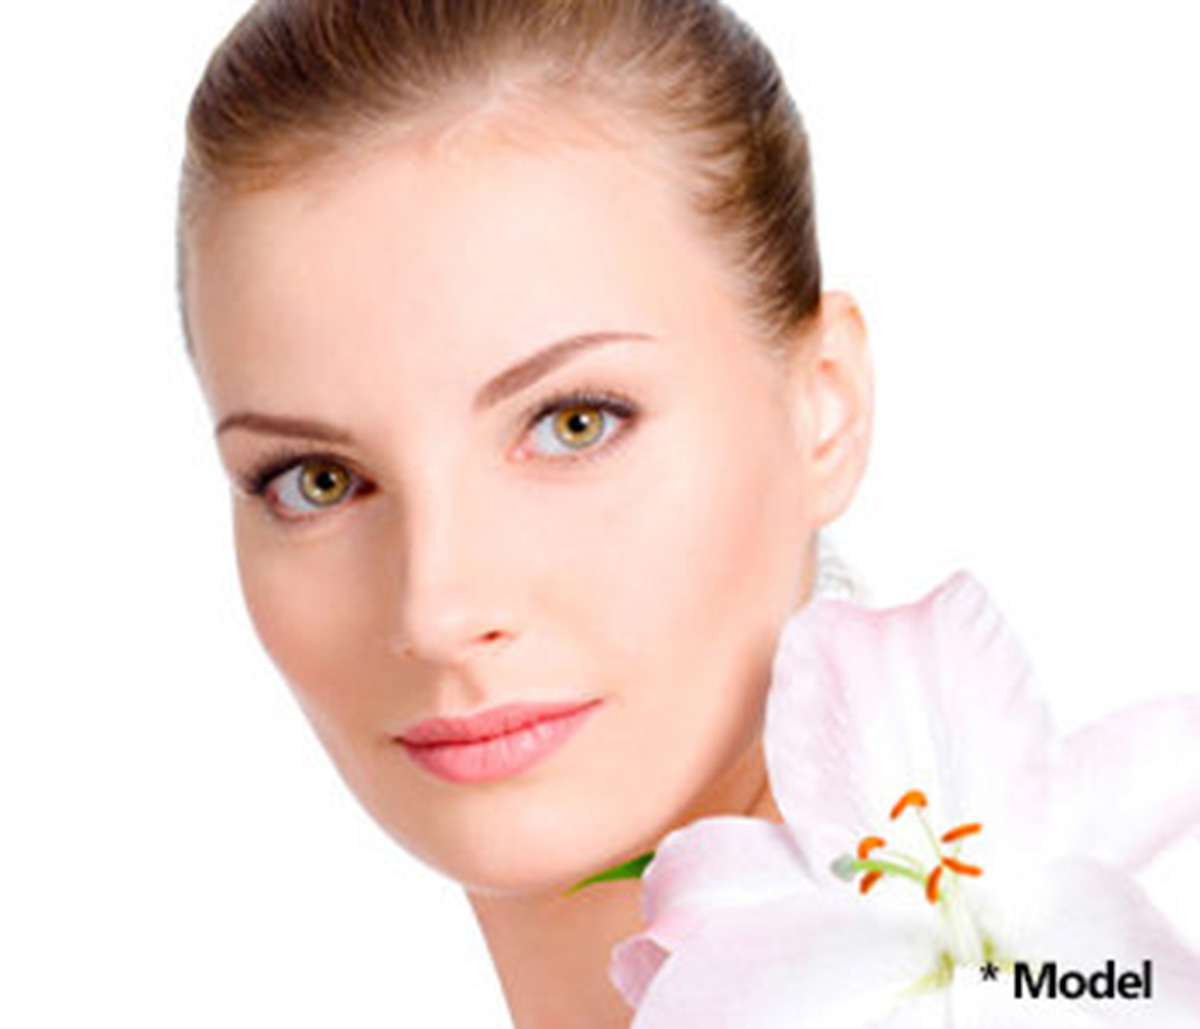 Plastic surgery services provided by doctor in Beverly Hills